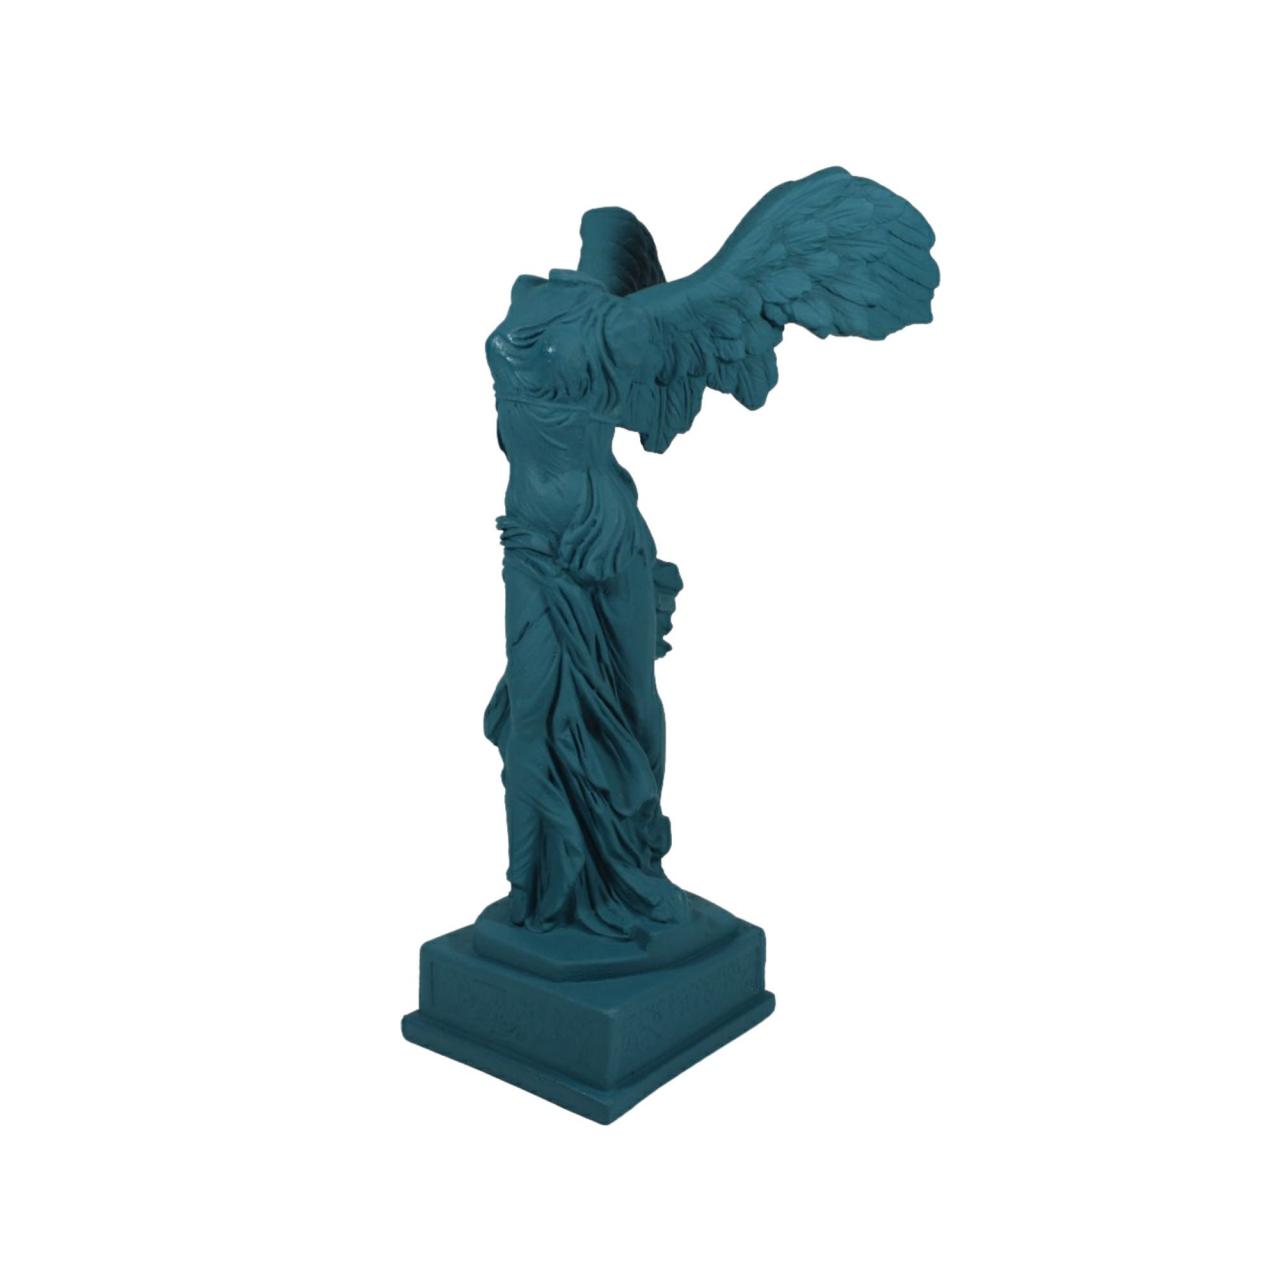 Nike Winged Victory Of Samothrace Replica Louvre Museum Sculpture Handmade Statue 39cm - Petrol Color